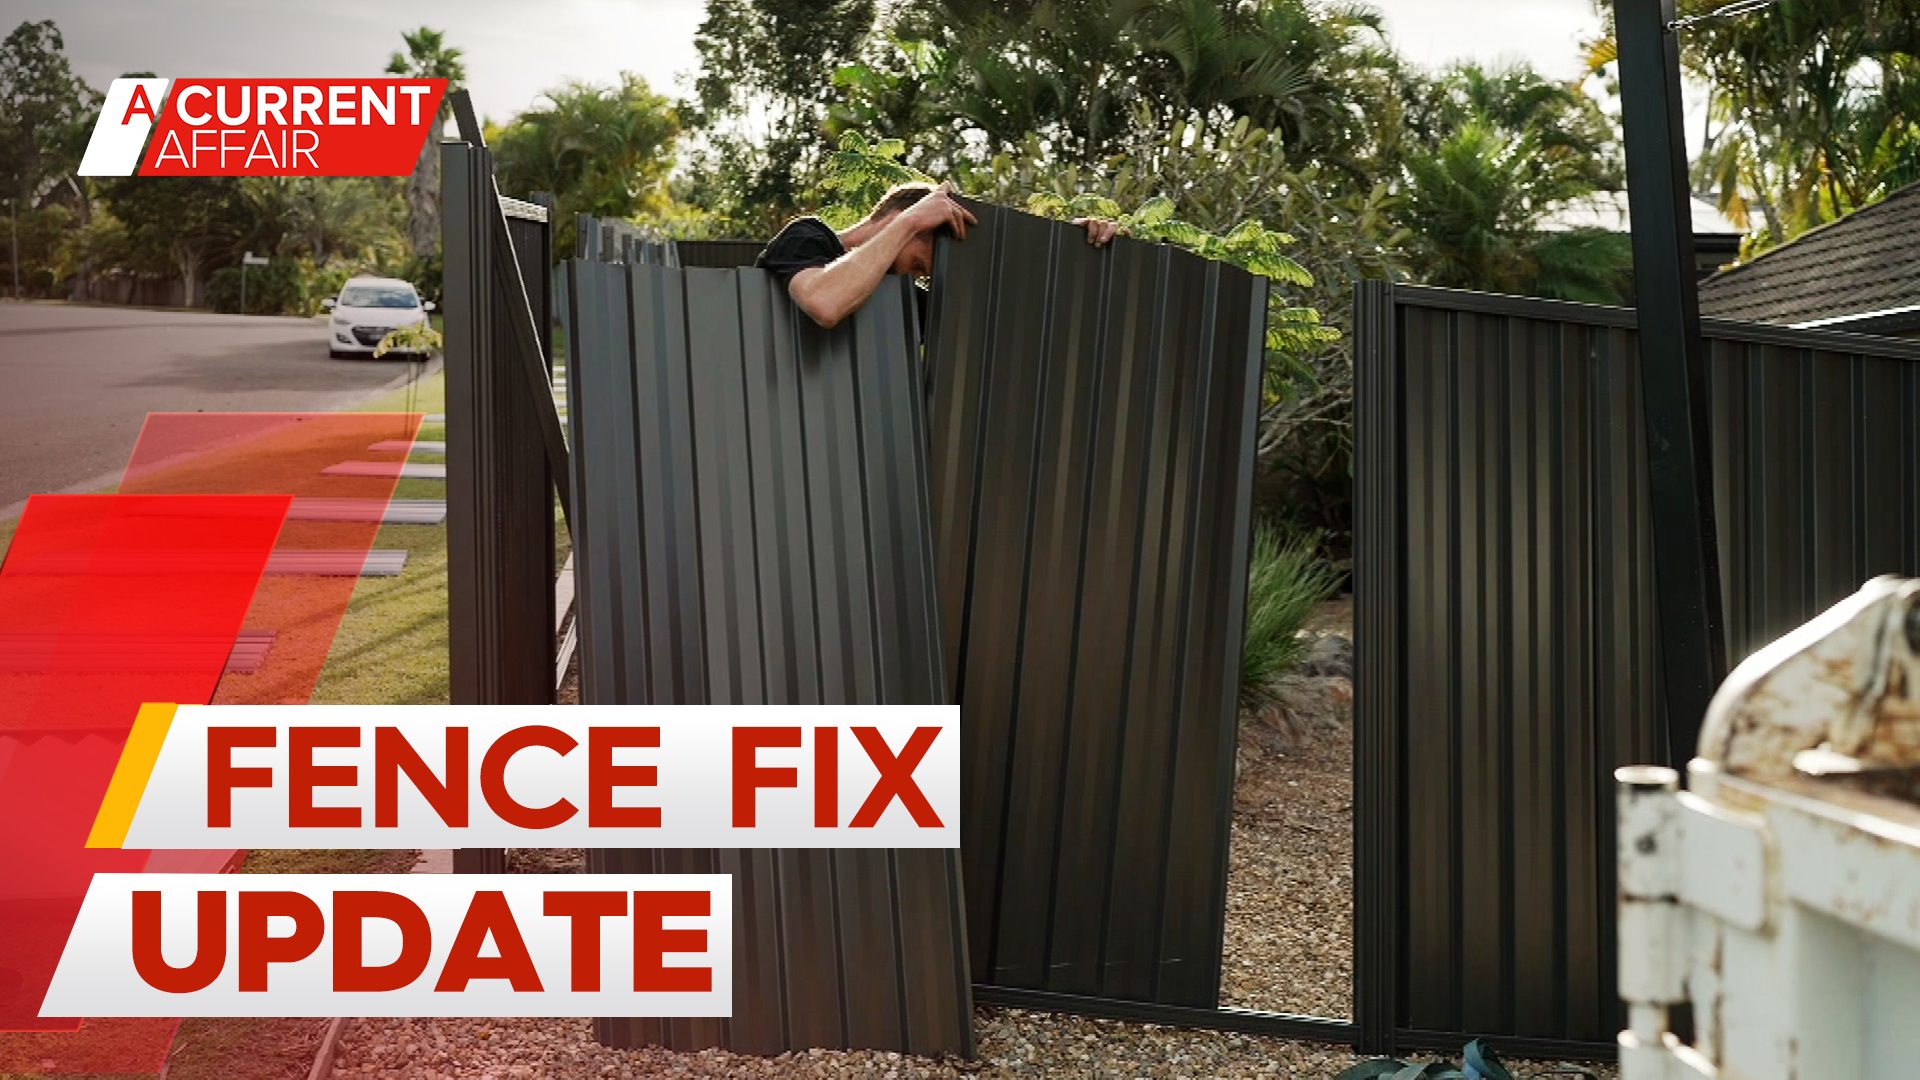 Kind-hearted builder steps up to fix fence job ditched by dodgy tradie